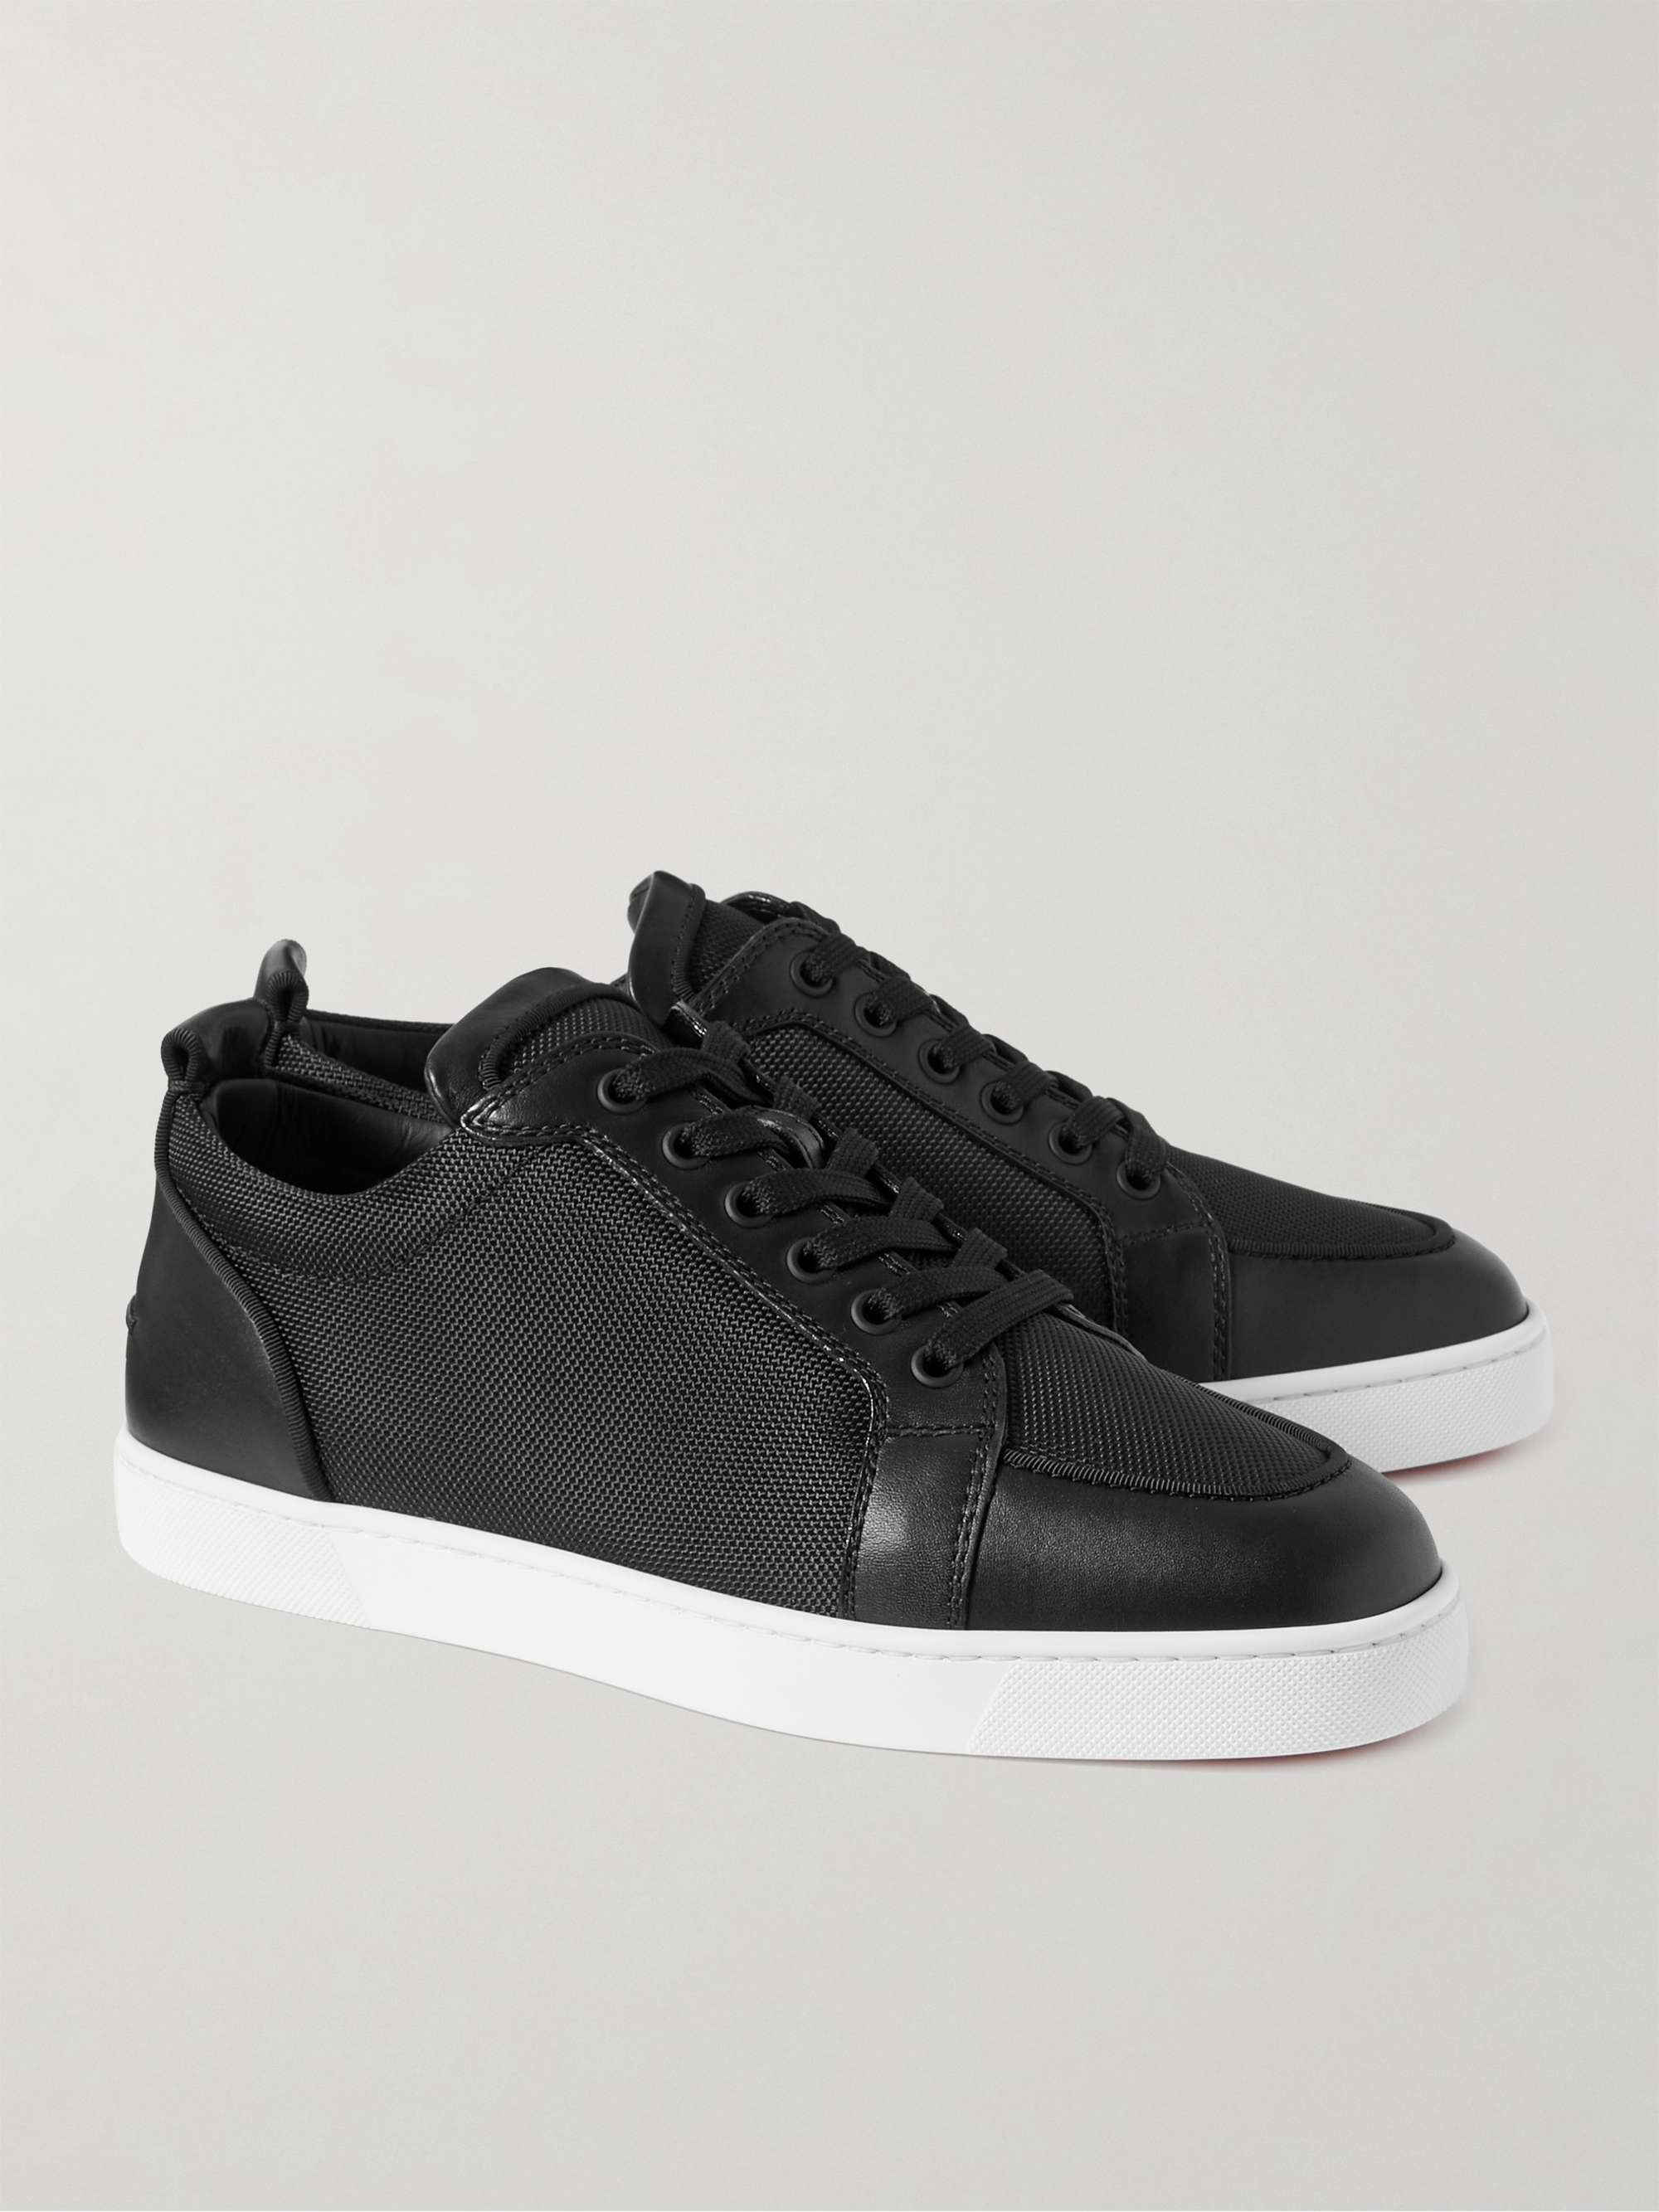 CHRISTIAN LOUBOUTIN Rantulow Leather-Trimmed Mesh Sneakers